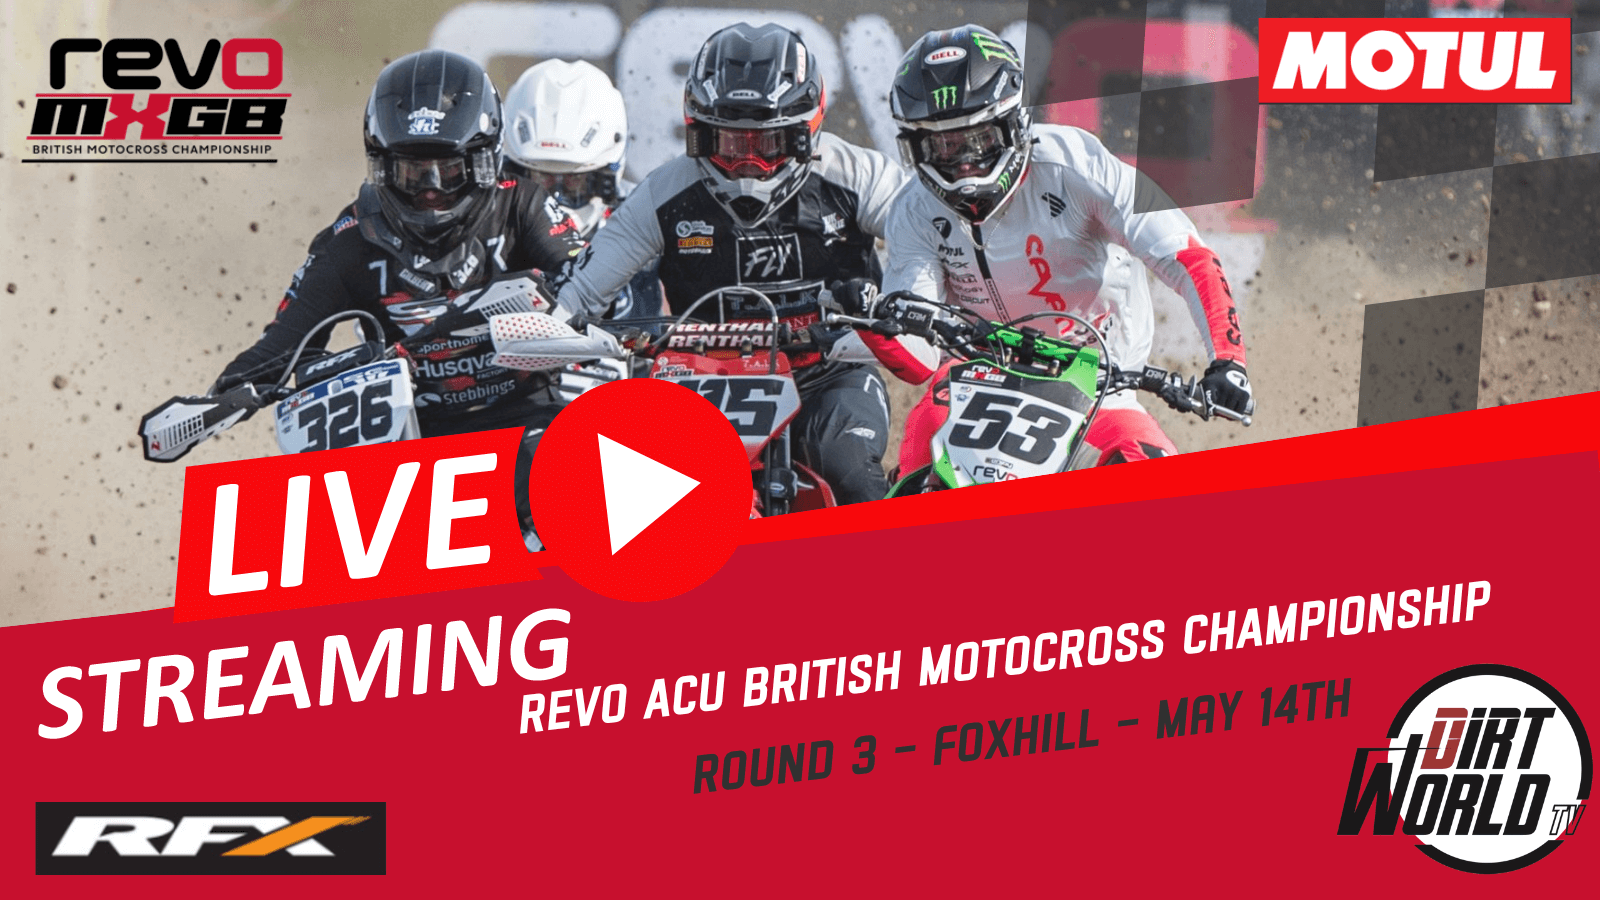 Pay-to-view livestream at Foxhill Revo round